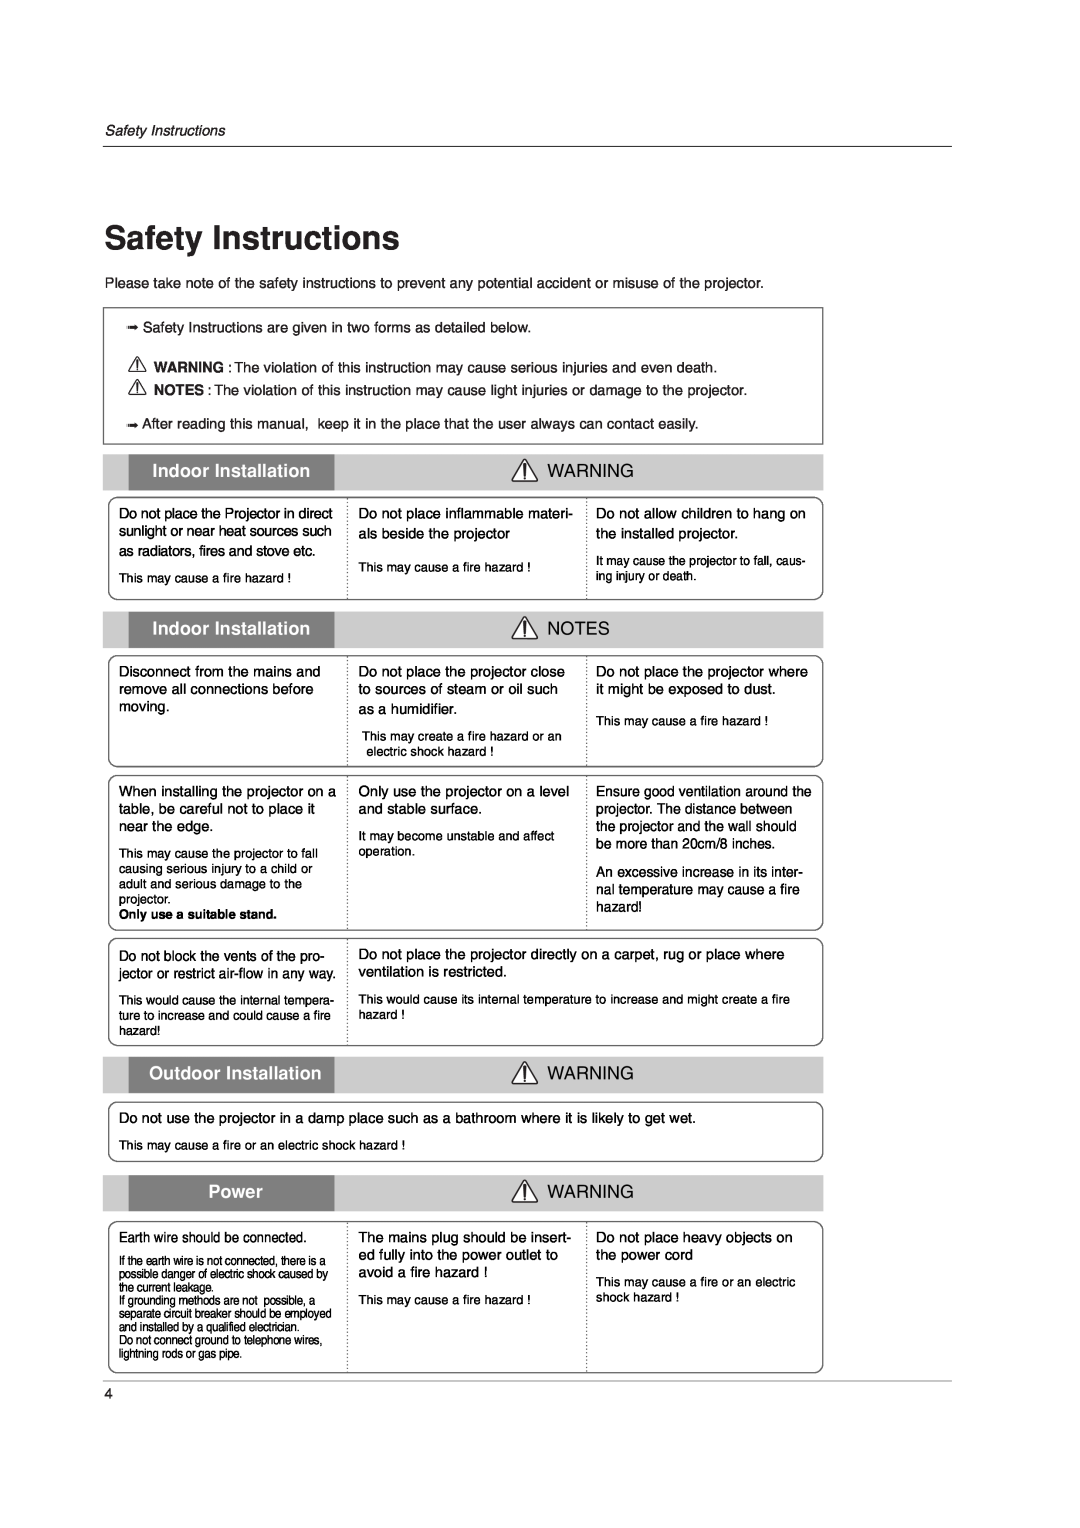 LG Electronics RD-JT92, RD-JT91 owner manual Safety Instructions, Indoor Installation, Outdoor Installation, Power 